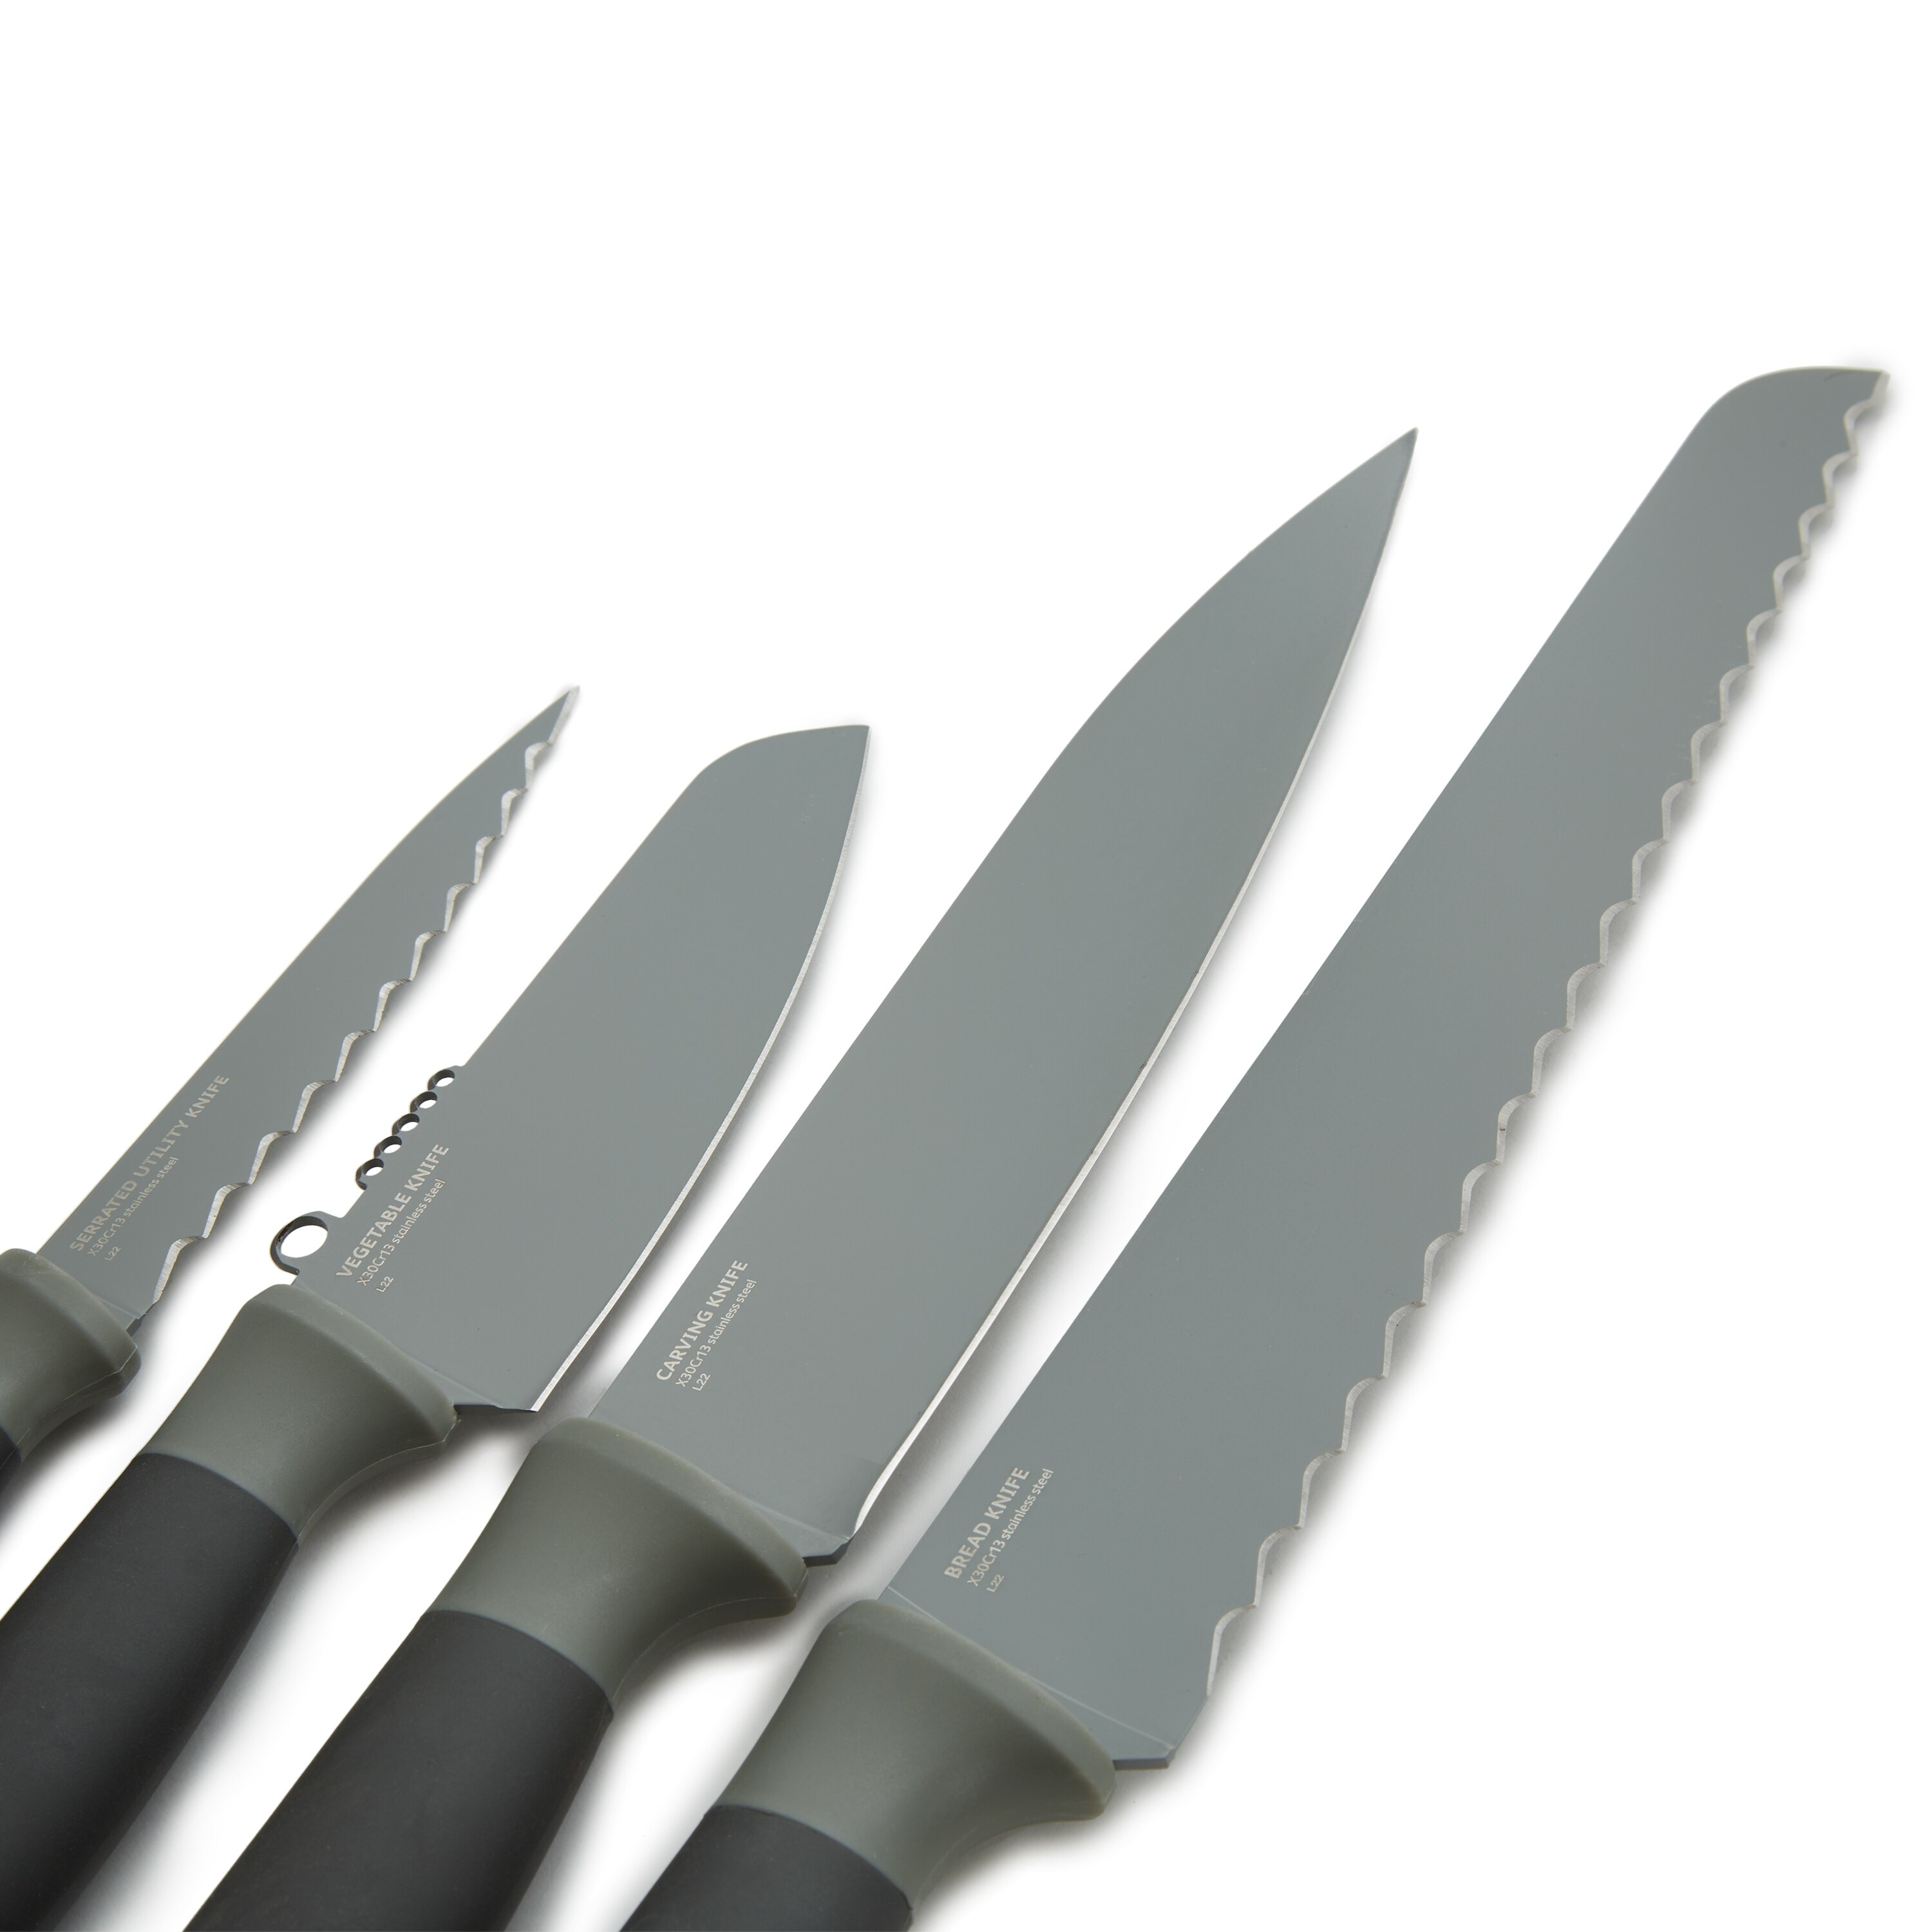 https://ak1.ostkcdn.com/images/products/is/images/direct/e7d993e1d05fb0f84ddd6b56fe6a45fdc6e30b6e/BergHOFF-Balance-4Pc-Nonstick-Knife-Set%2C-Recycled-Material%2C-Protective-Sleeve-Included.jpg